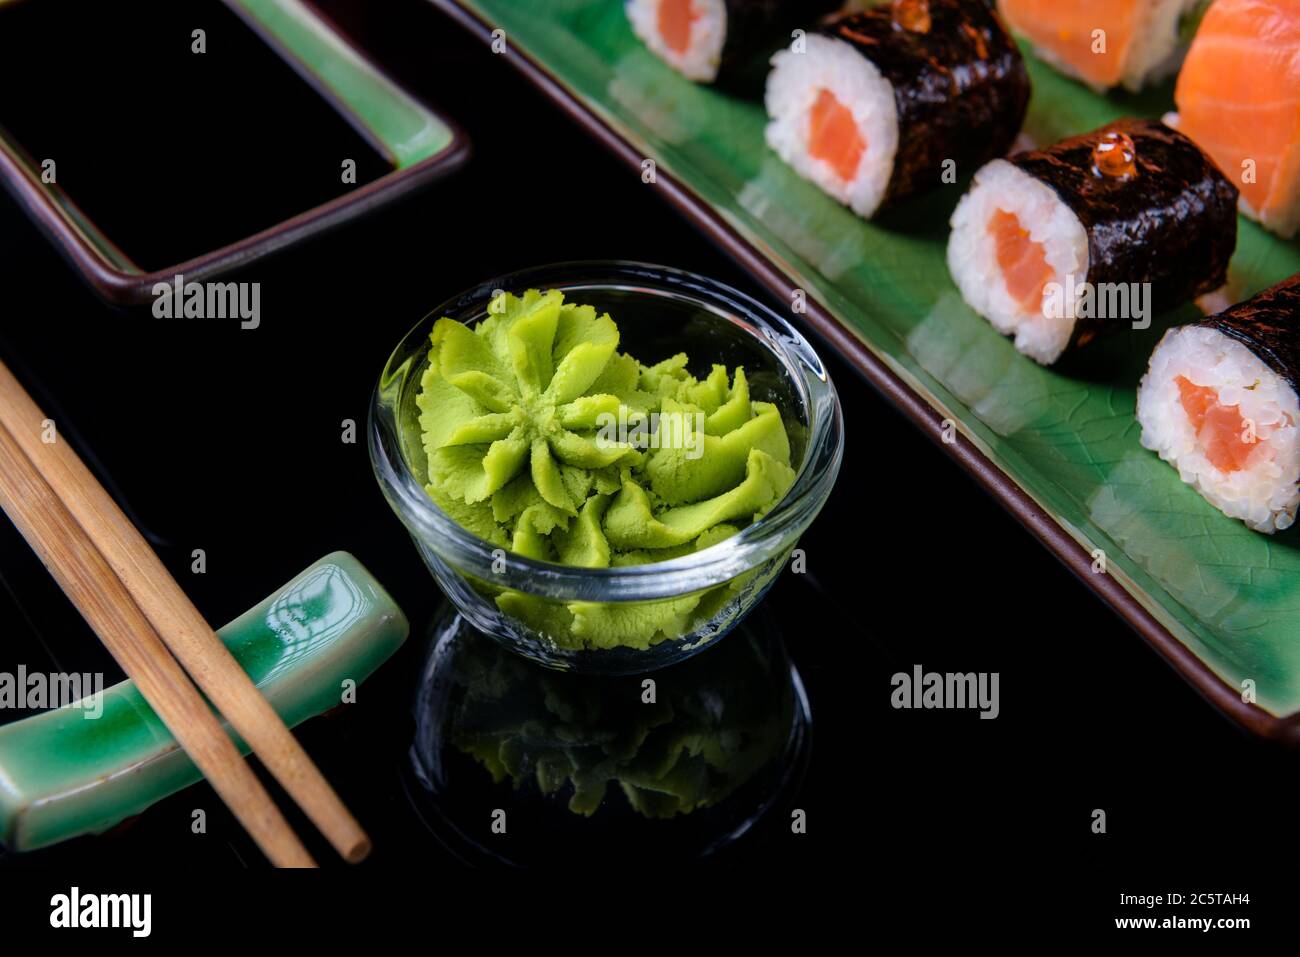 Japanese food. A set of various rolls of salmon, eel, shrimp and red caviar, in a beautiful green bowl, on a black background with reflection. Stock Photo